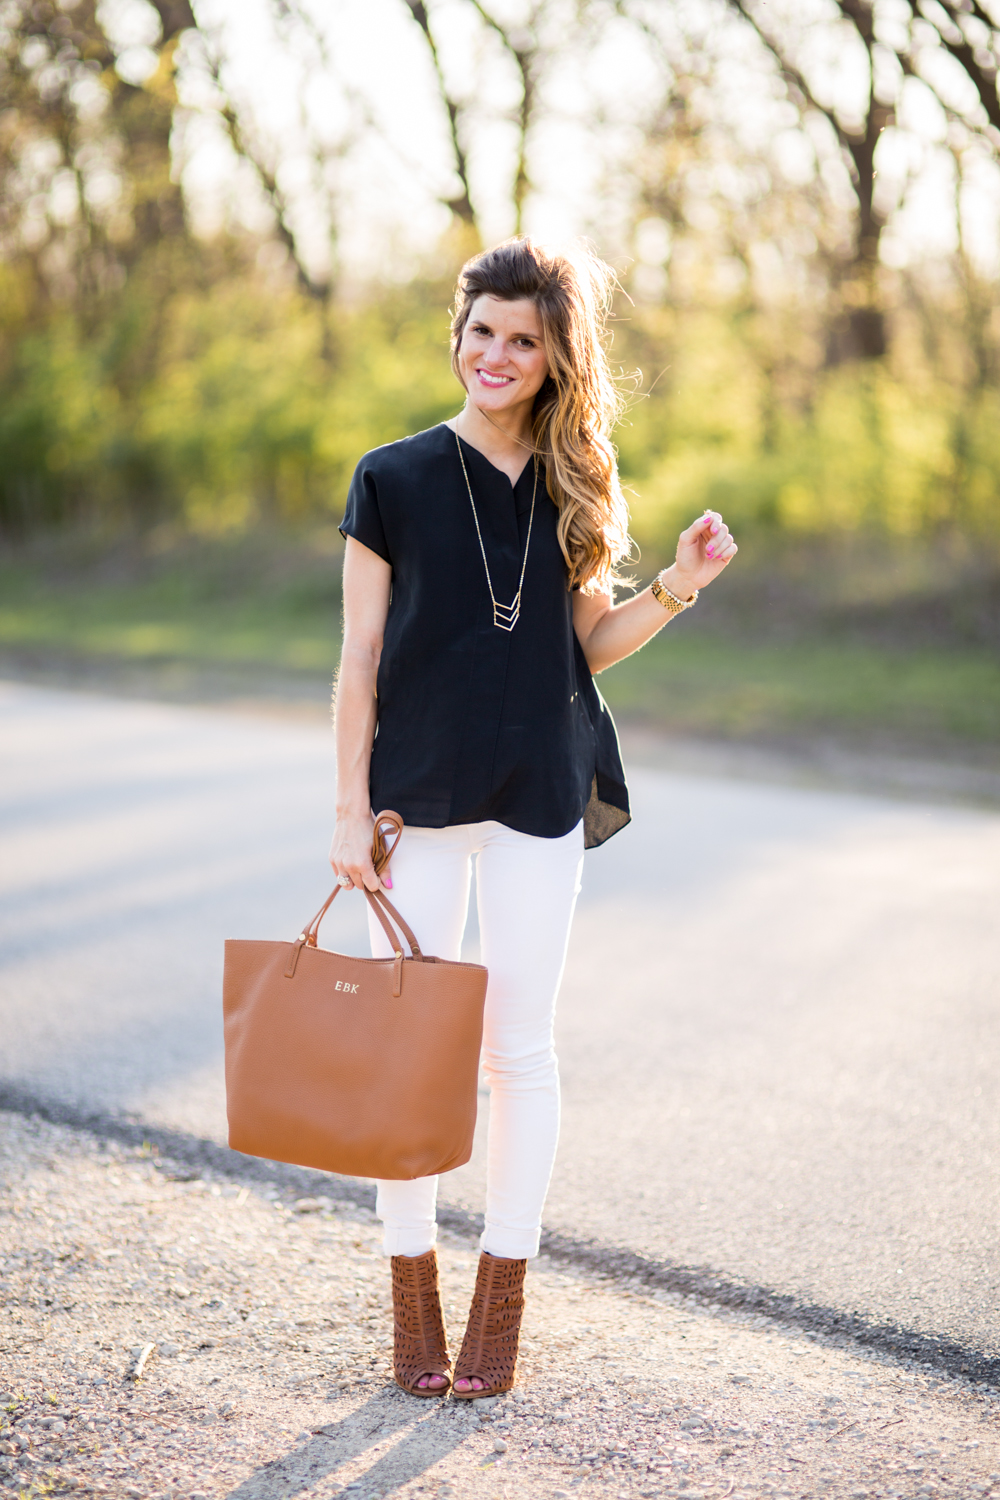 Brown Pumps with White Jeans Outfits (4 ideas & outfits)